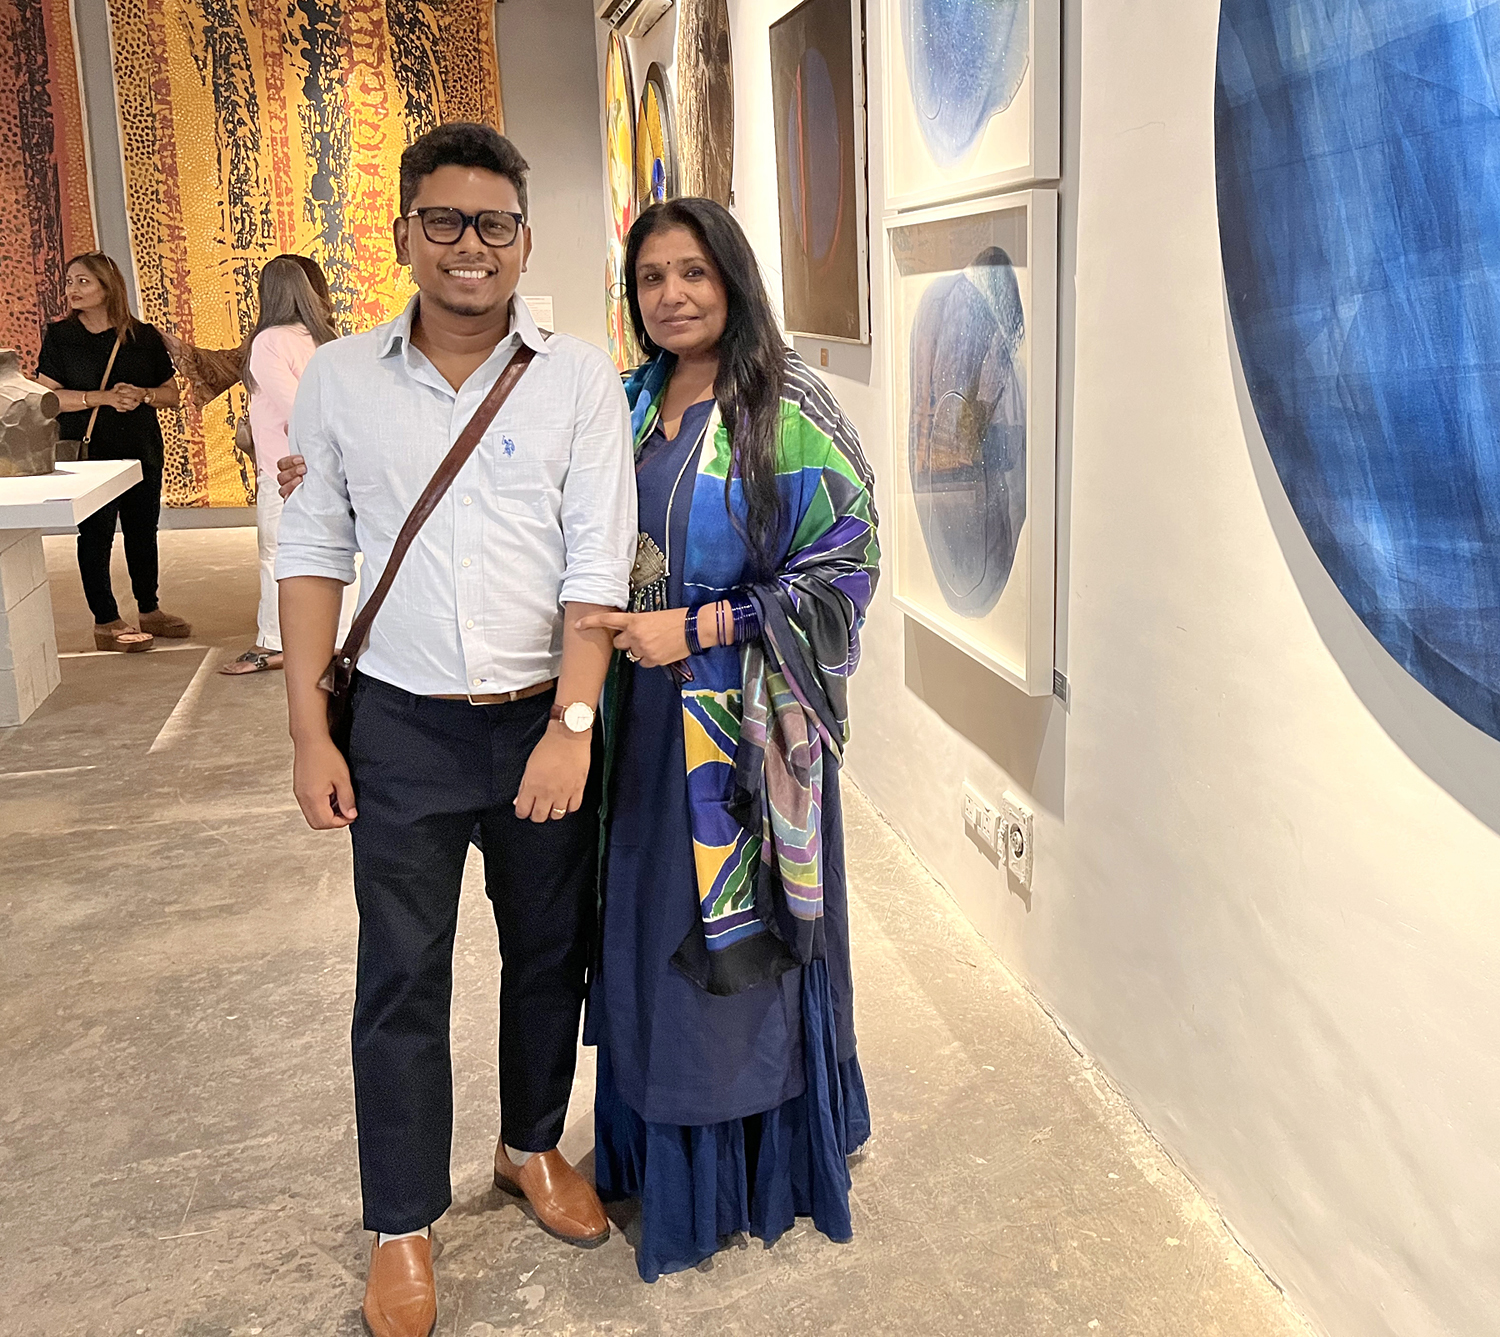 Ananta Mandal with artist Sujata Bajaj at opening day of “The Art of India” Mumbai, this epic exhibition where my artwork exhibiting along with 100 Indian masters!!